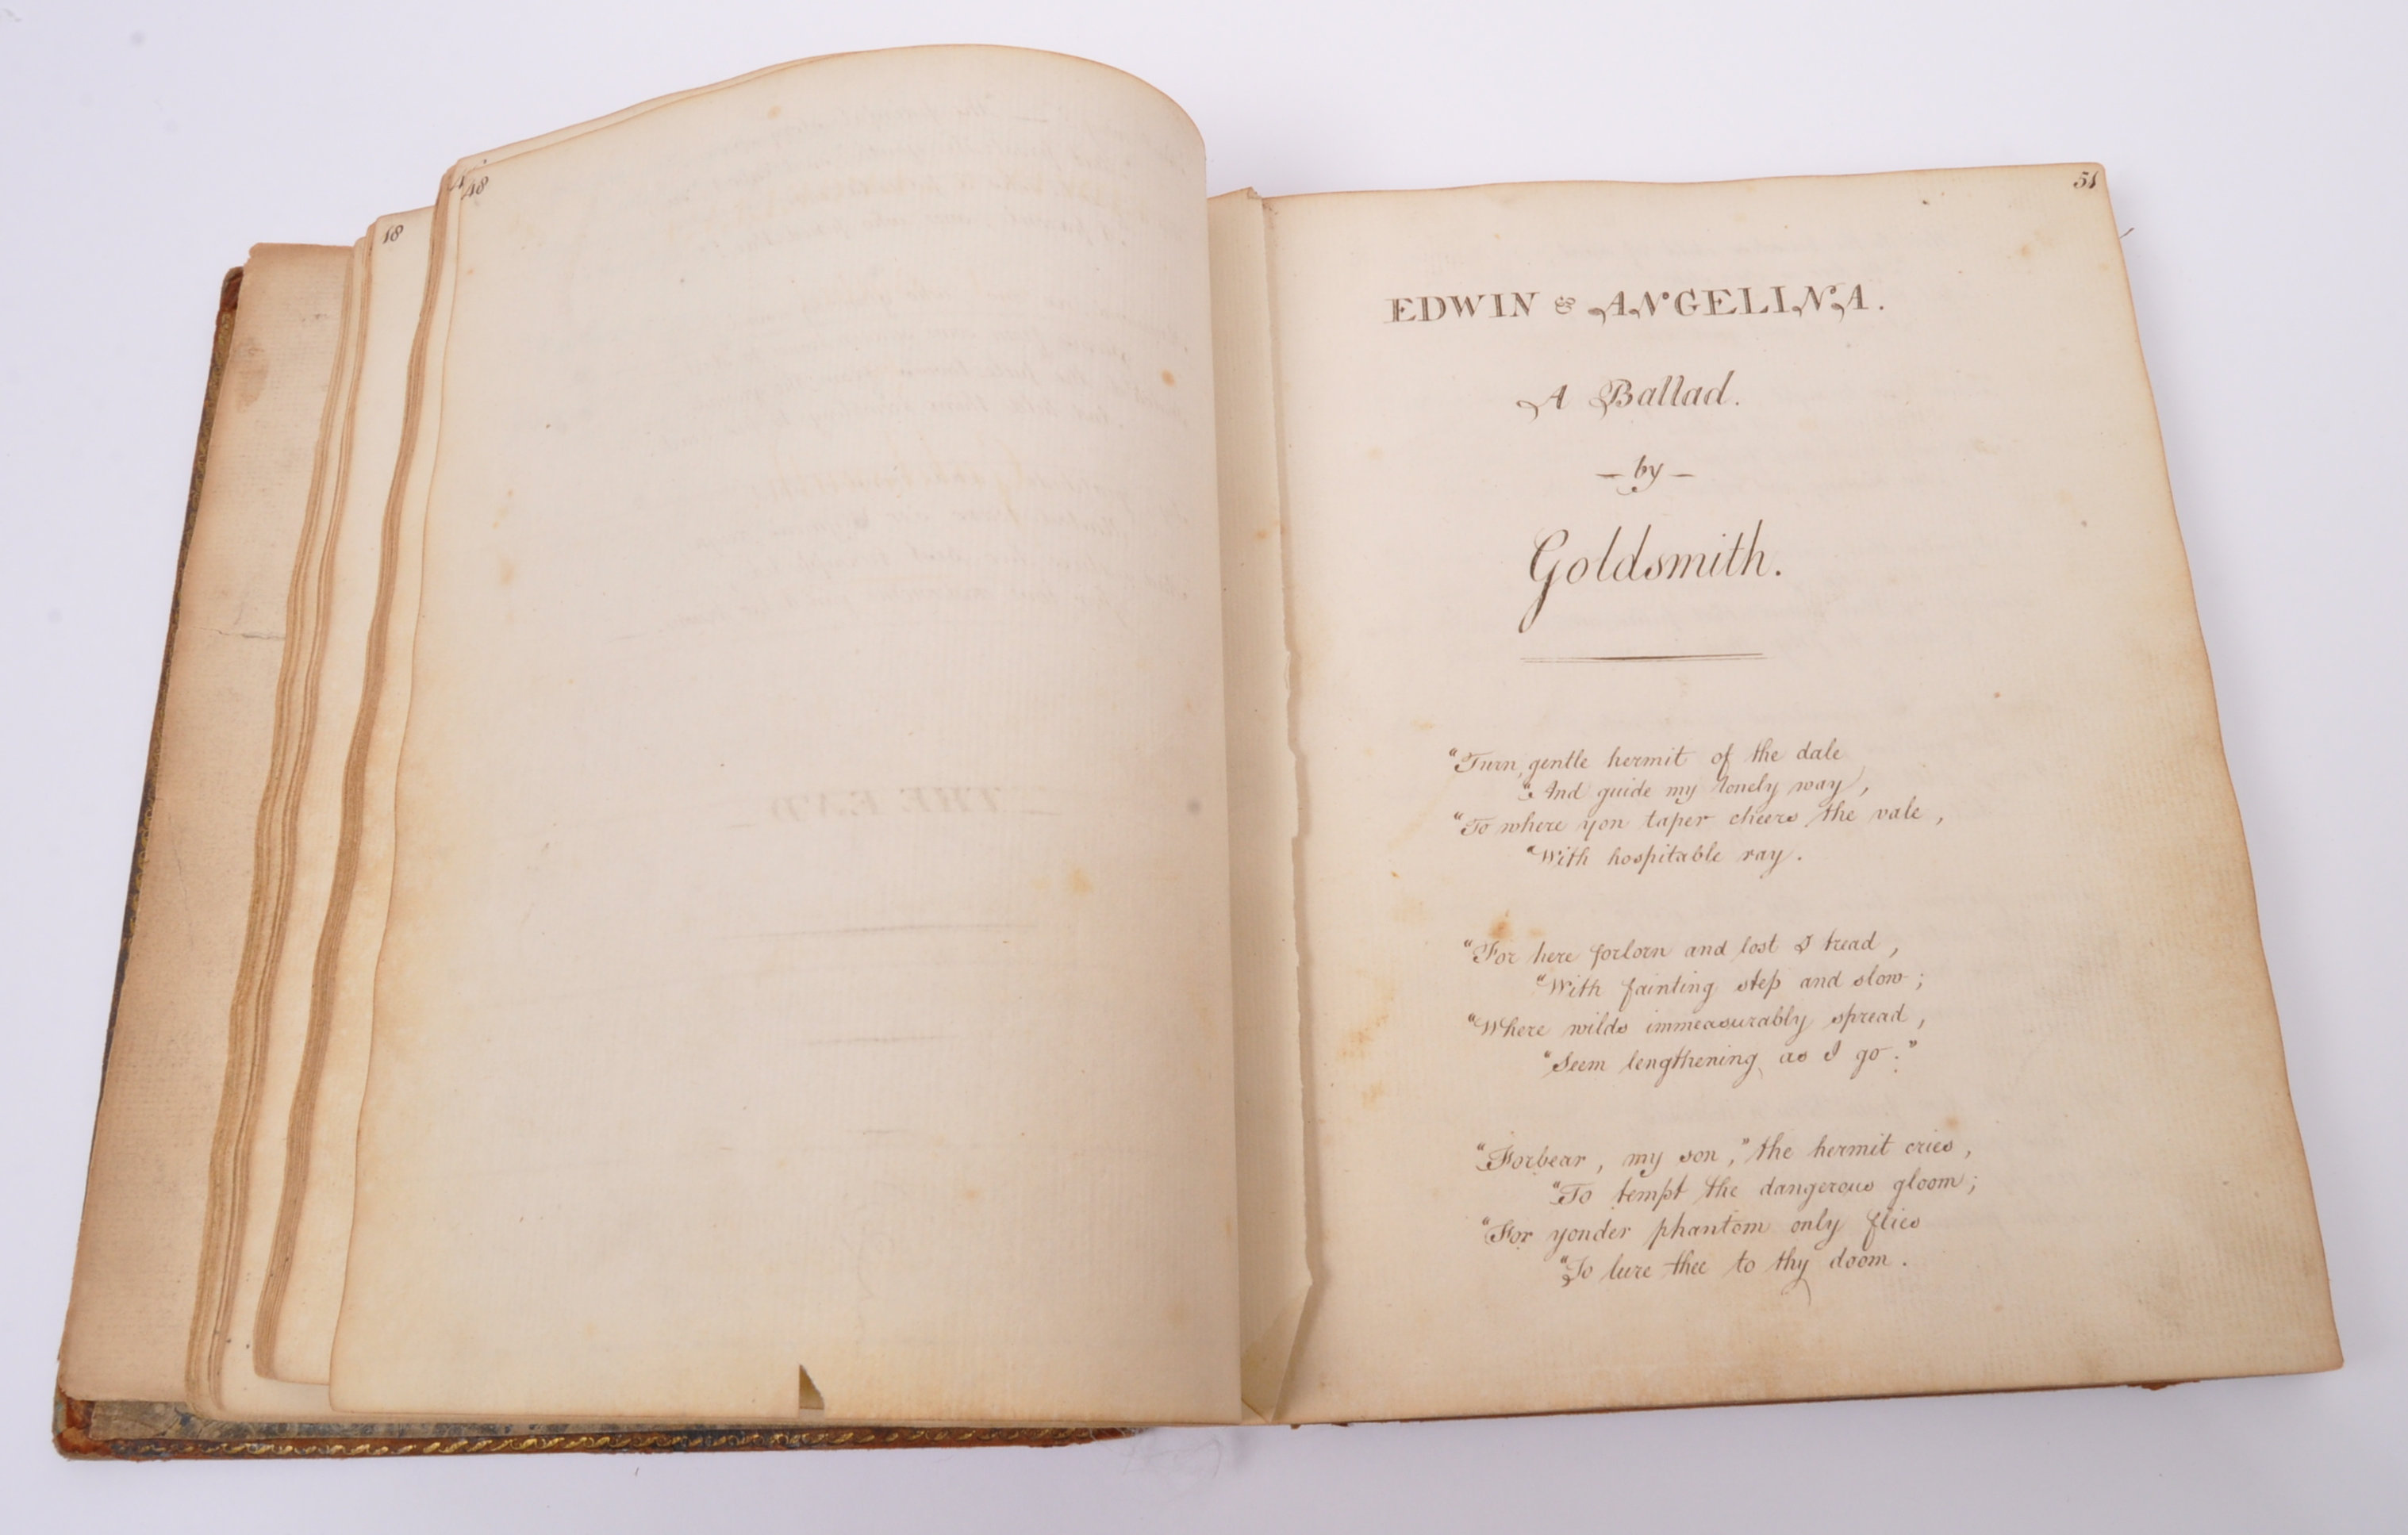 1794 - A COLLECTION OF POEMS - HANDWRITTEN MANUSCRIPT BOOK - Image 7 of 13